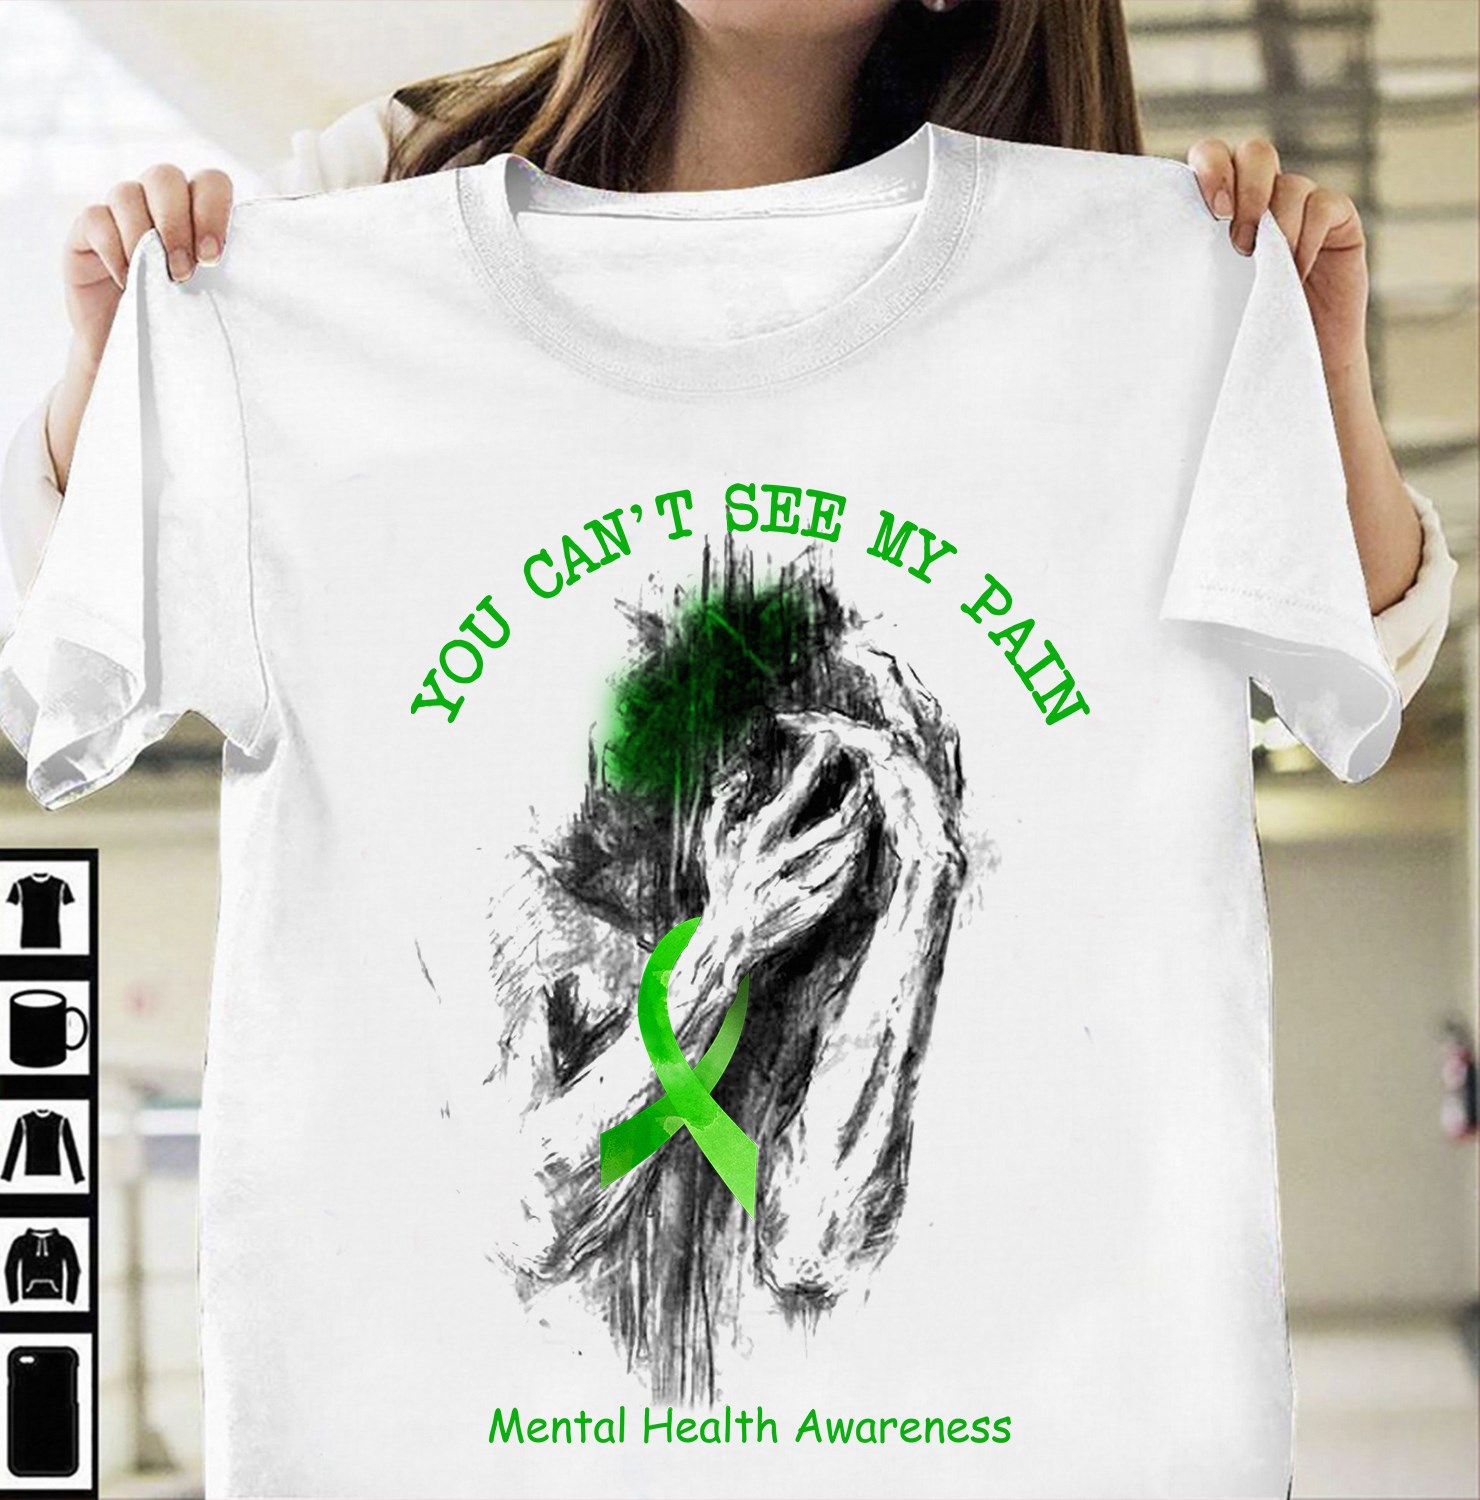 You can't see my pain - Mental Health Awareness